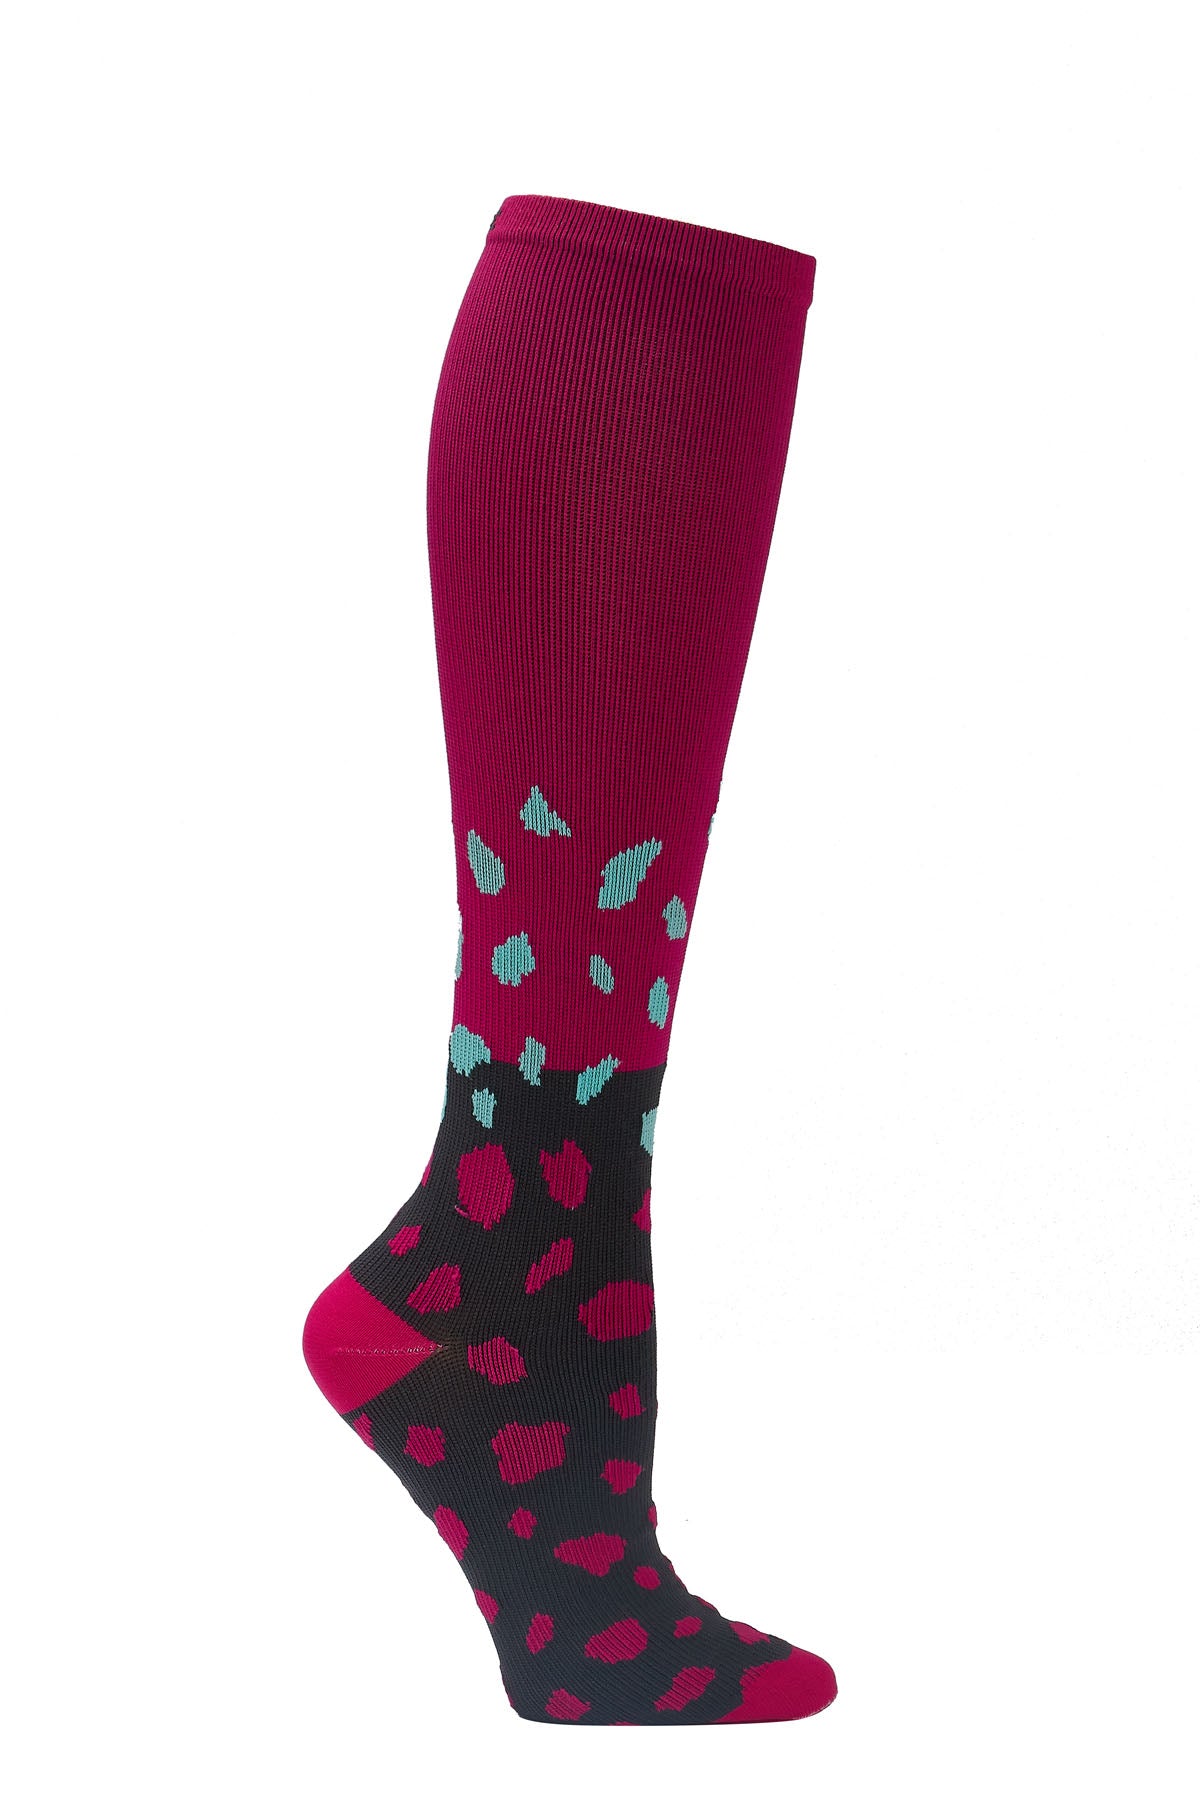 Cherokee Print Support Mild Compression Socks 8-12 mmHg Texture + Skin at Parker's Clothing and Shoes.